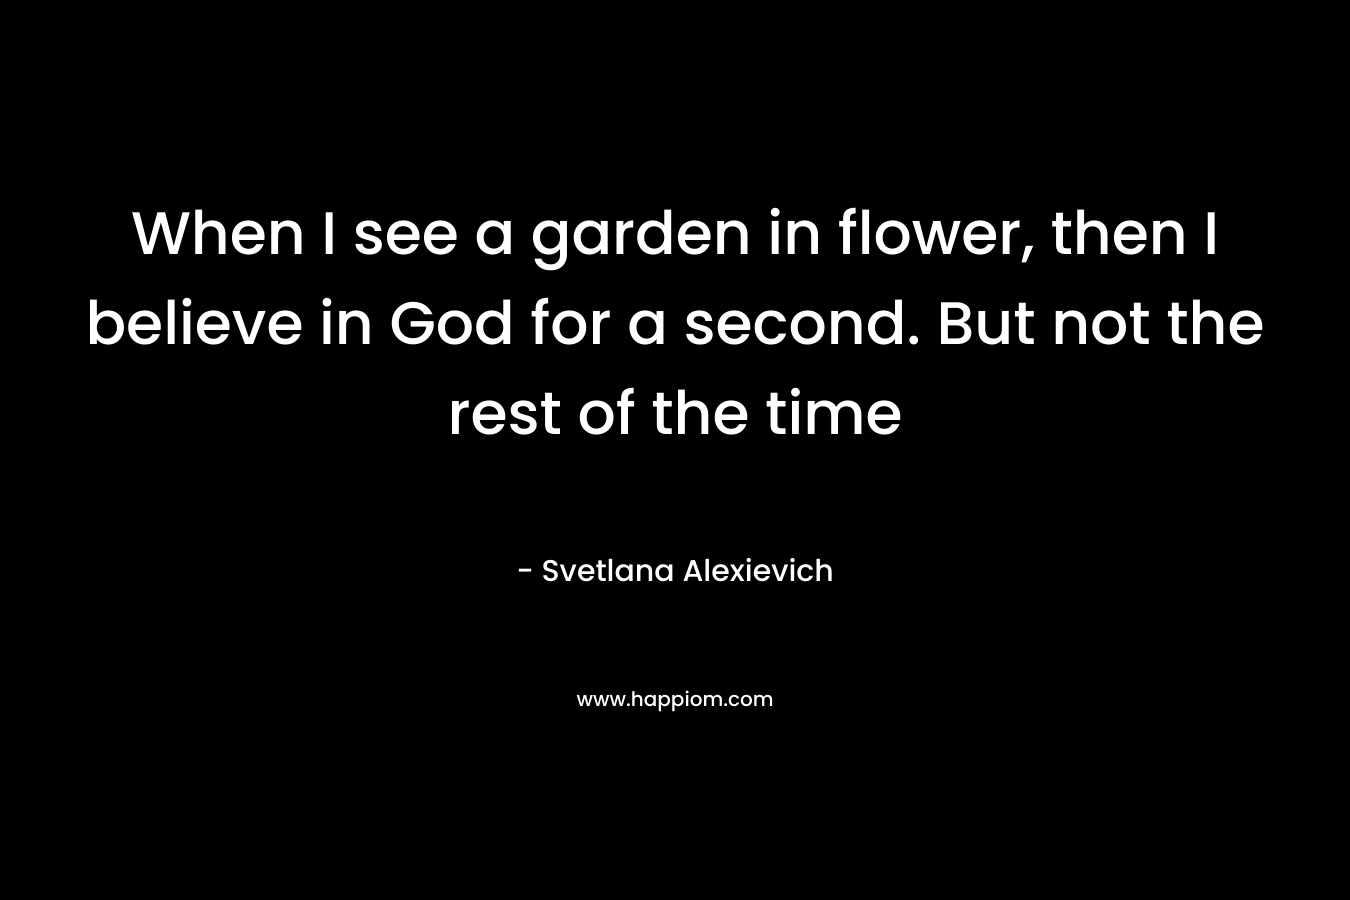 When I see a garden in flower, then I believe in God for a second. But not the rest of the time